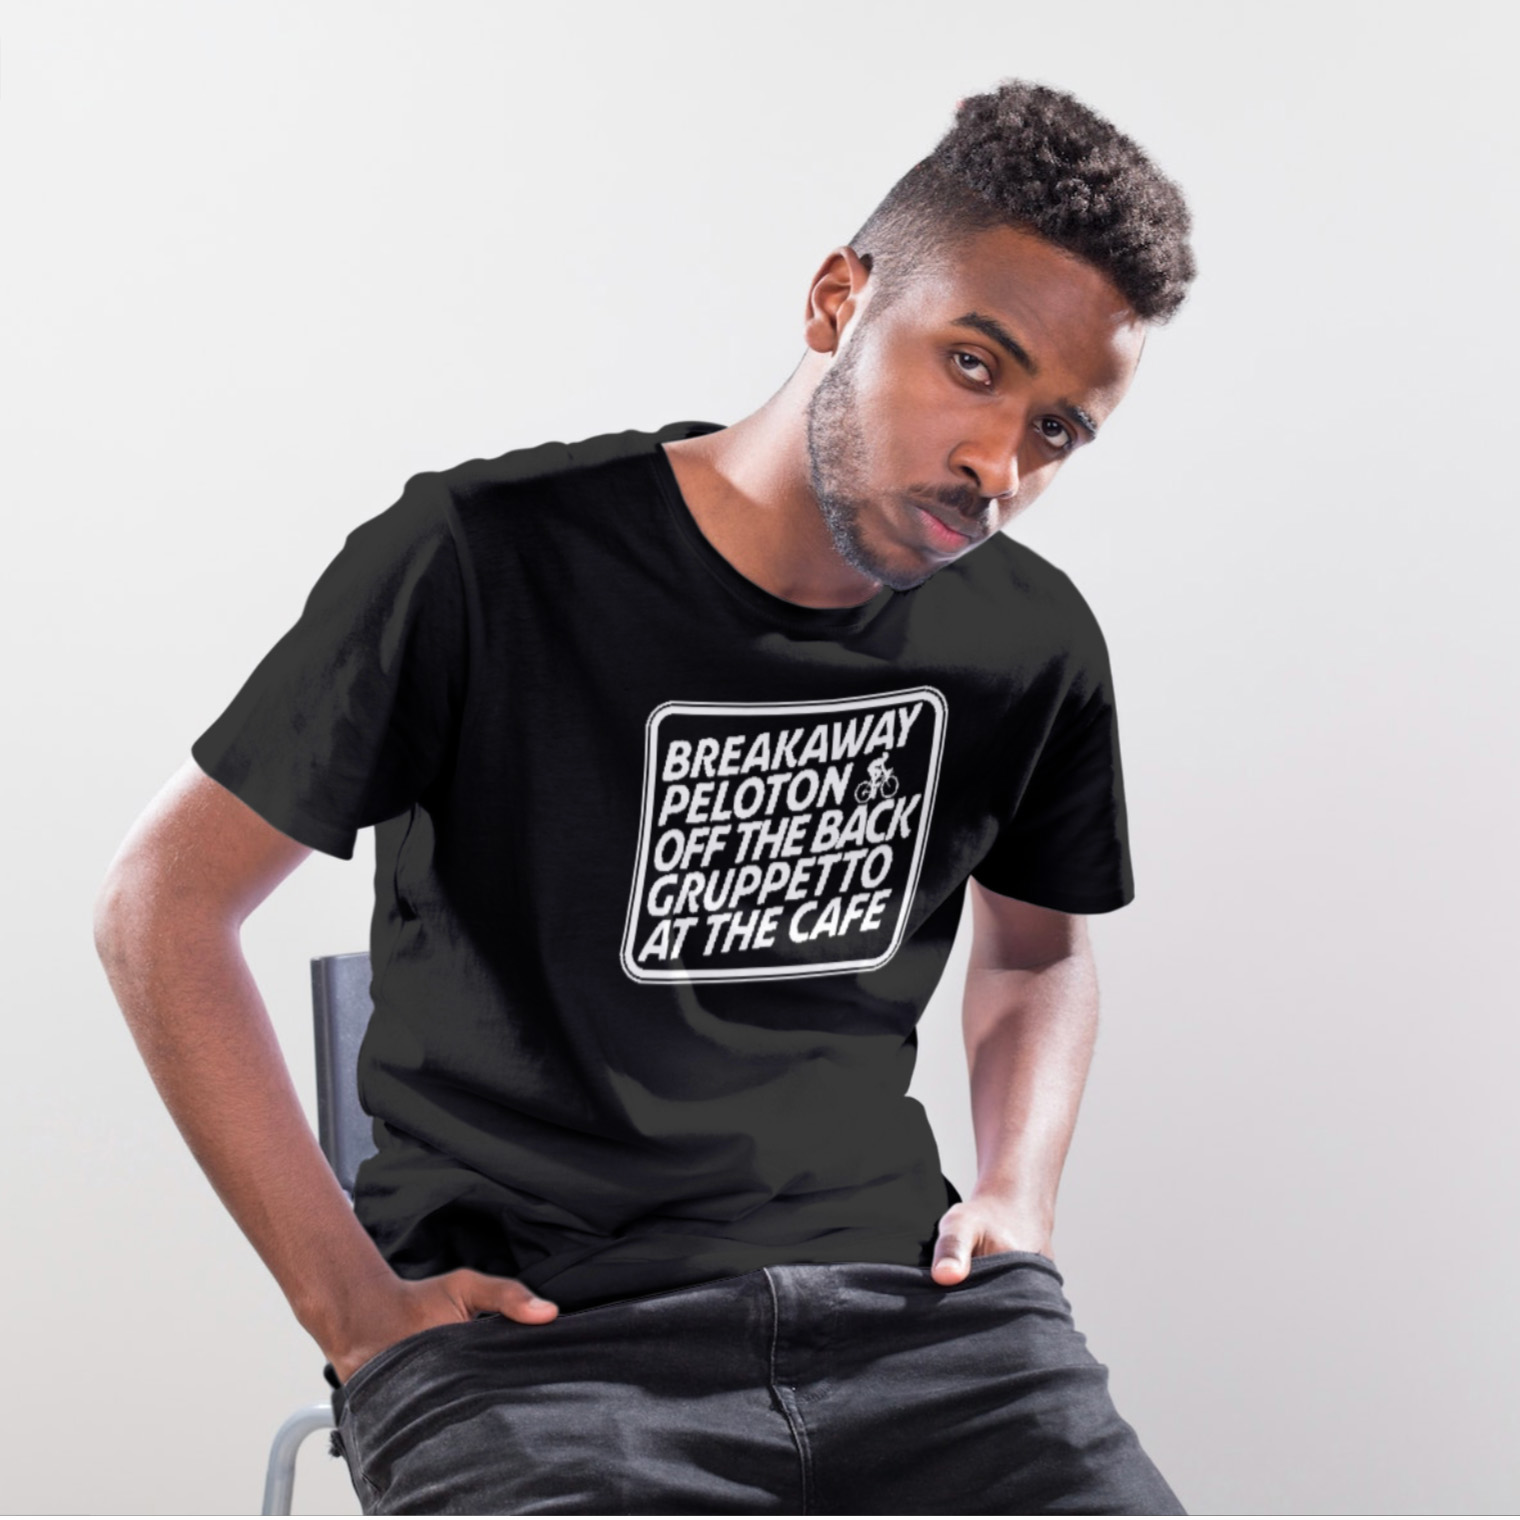 model with Race Position tee